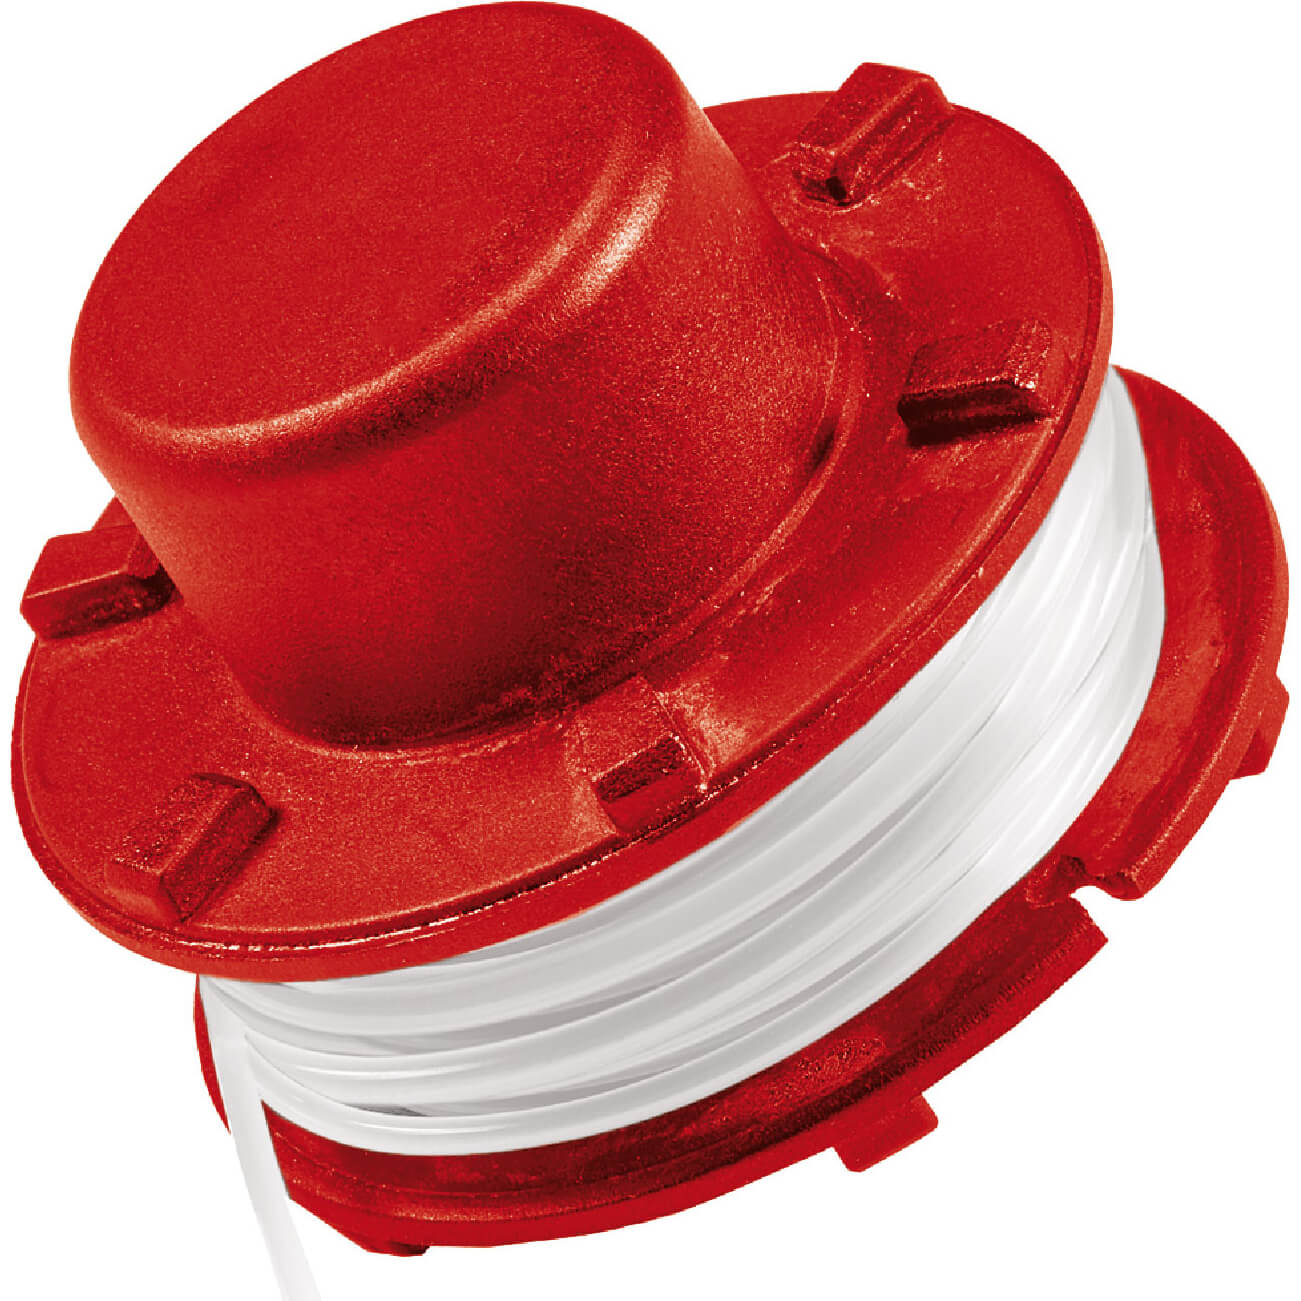 Einhell Genuine Spool and Line for AGILLO, GE-CT 18/33, GP-CT 36/35 and GE-CT 36/30 Grass Trimmers 2mm 8m